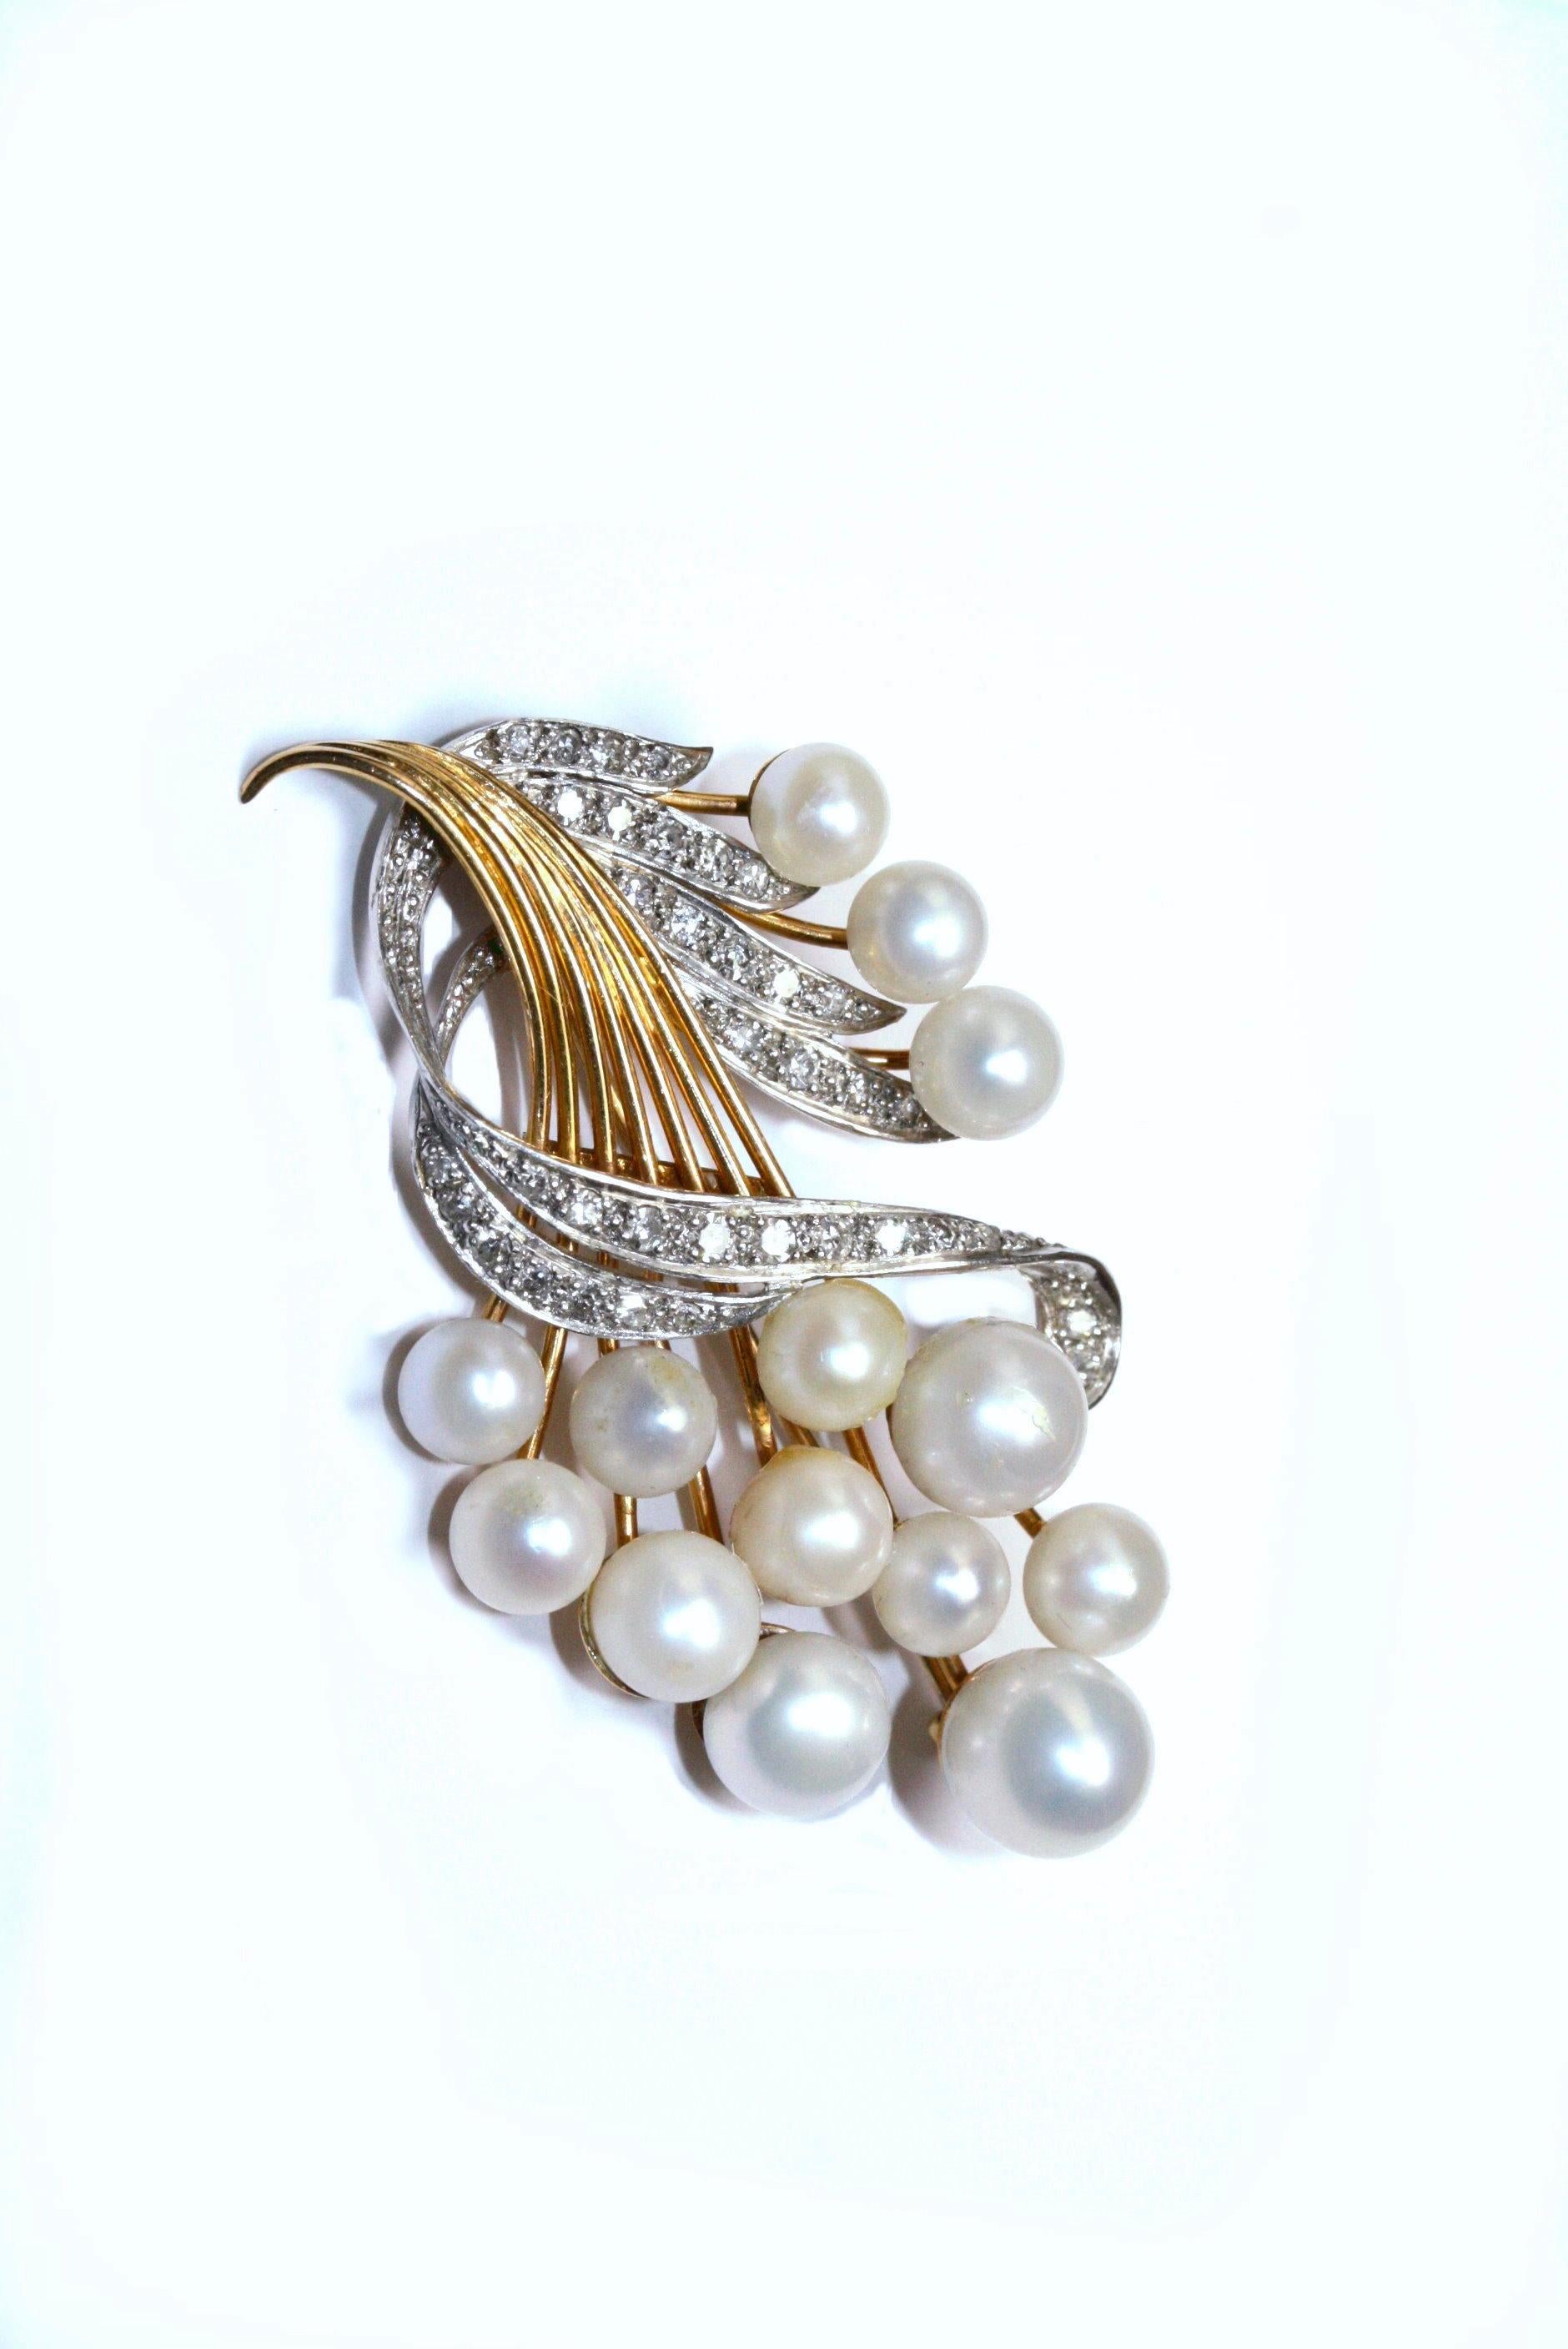 A brooch  in the form of a spray set with Scottish natural river pearls. The brooch is set with 14 pearls measuring 7.85mm to 5.3mm diameter and 37 single cut diamonds measuring from 1.55mm to 1.1mm. The total diamond weight is .25ct. The brooch